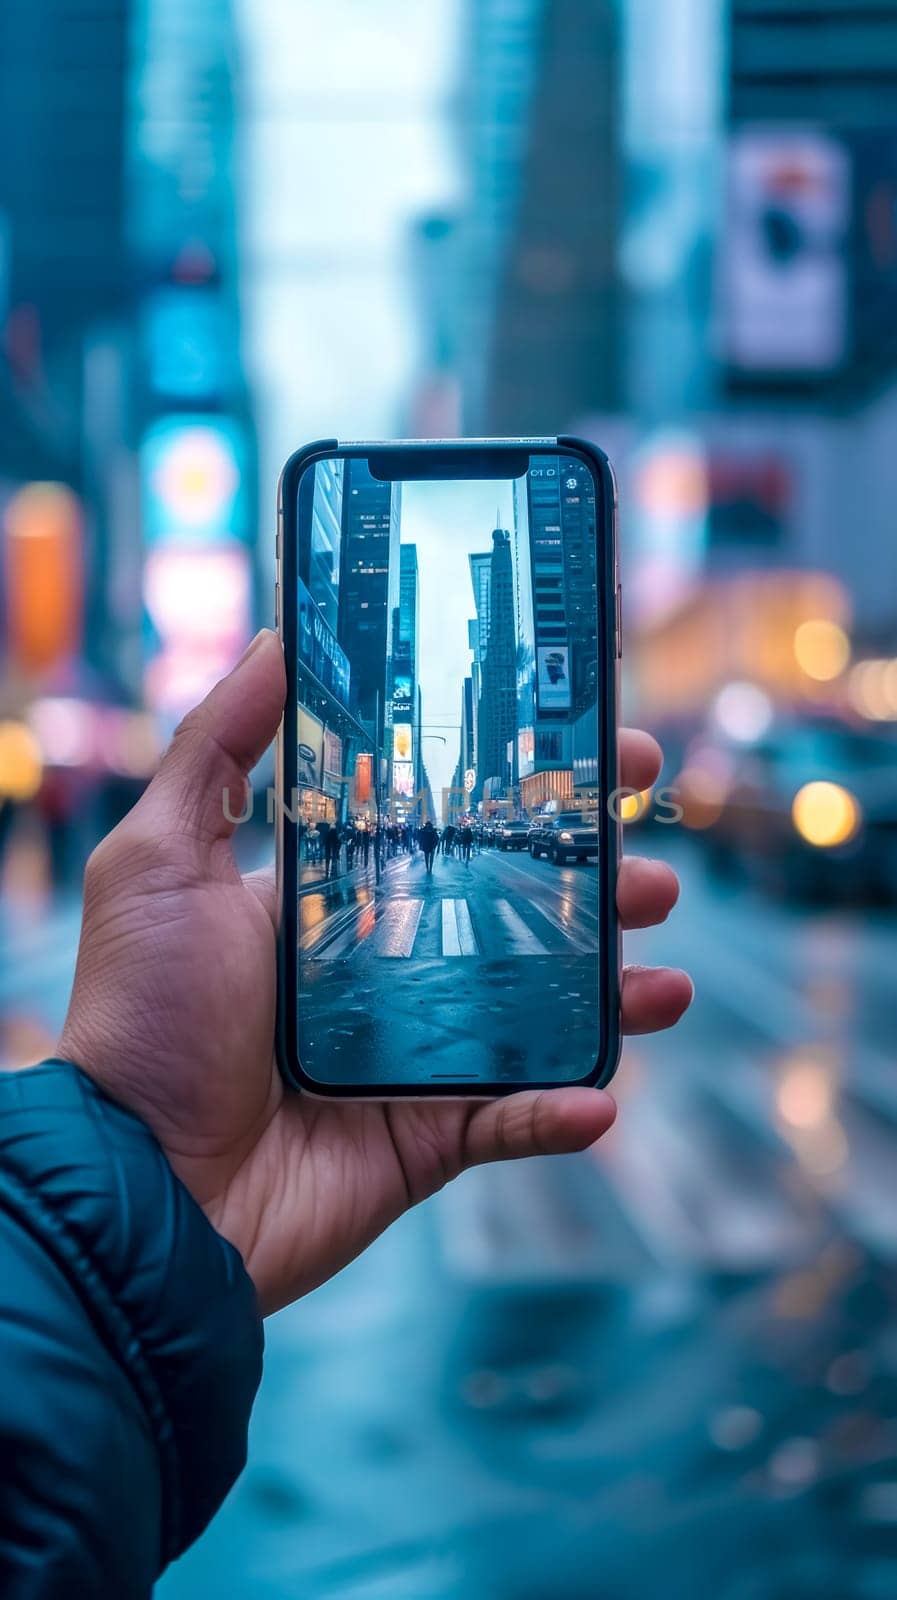 A hand holding a smartphone captures a bustling city street scene, displayed on the device's screen, juxtaposing the crisp digital image against the blurred reality in the background, vertical